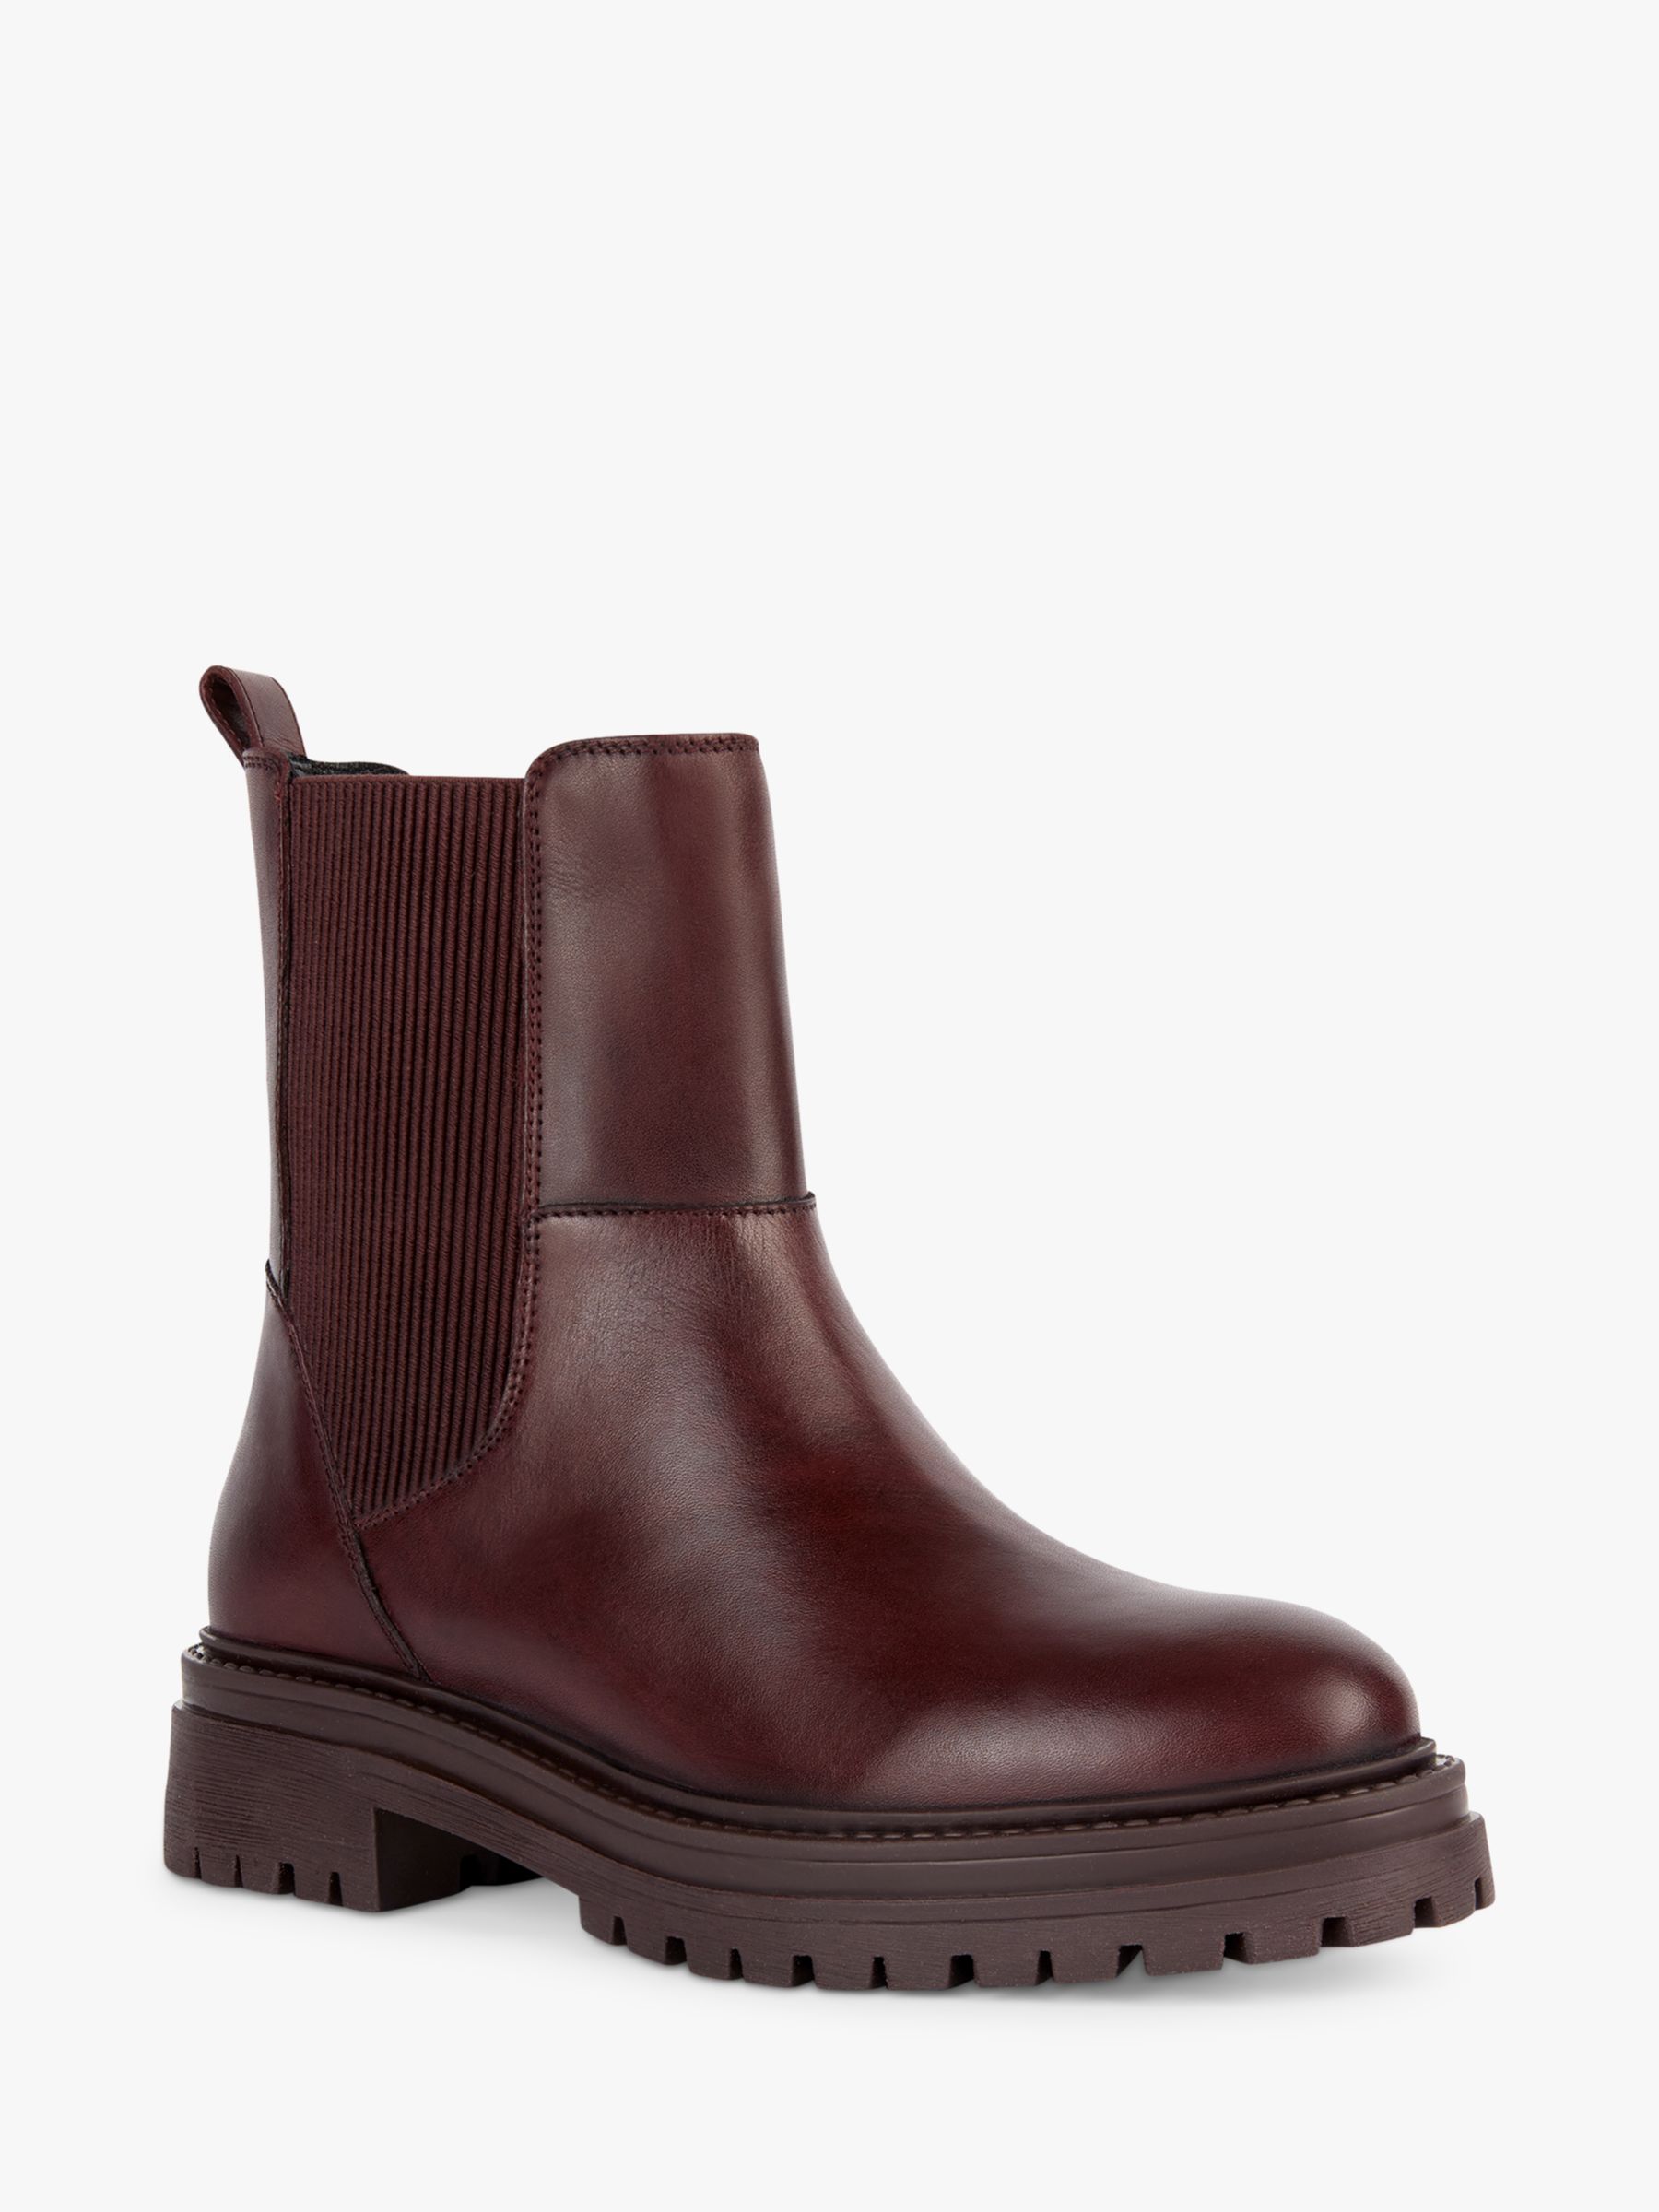 Geox Iridea Leather Ankle Boots, Wine at John Lewis & Partners